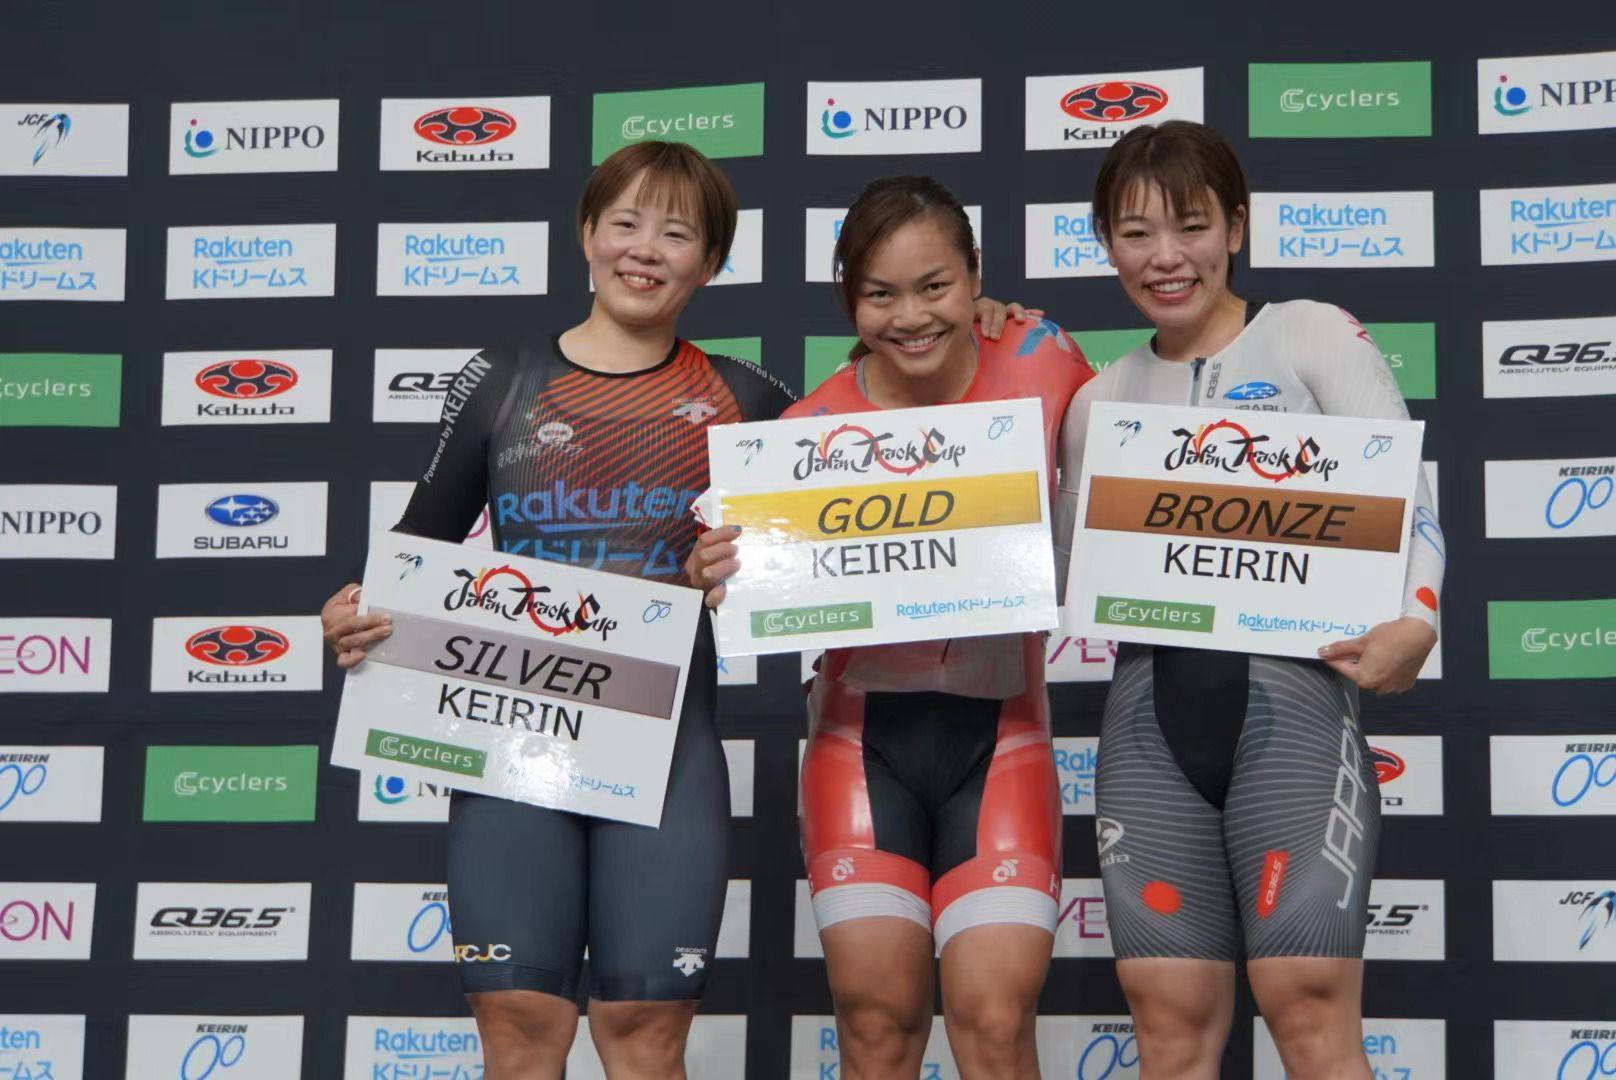 The top three women’s keirin finishers at the Japan Cup II. Photo: HKCA